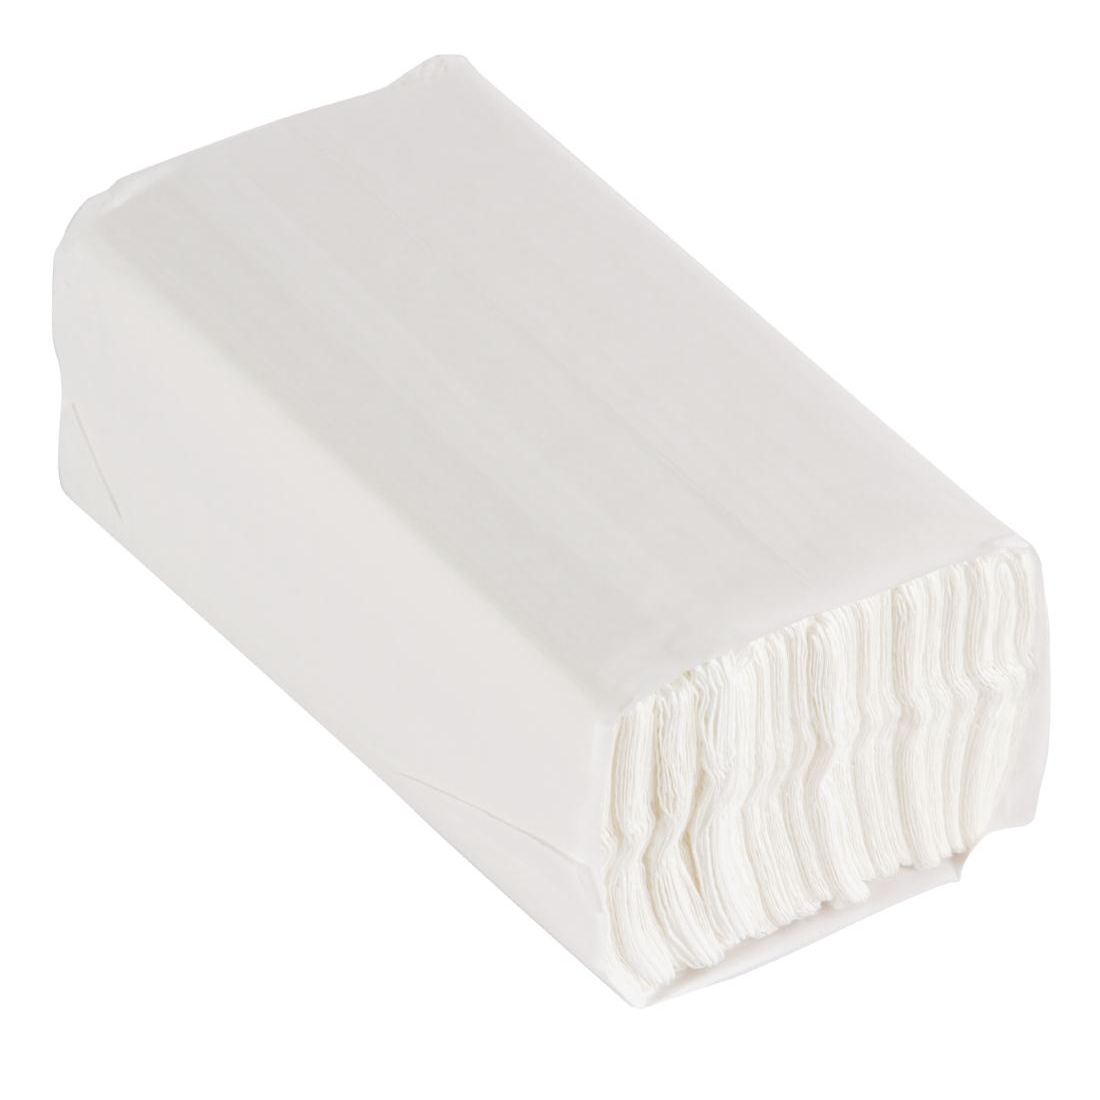 Jantex C Fold White Hand Towels 2Ply 100 Sheets Pack of 24